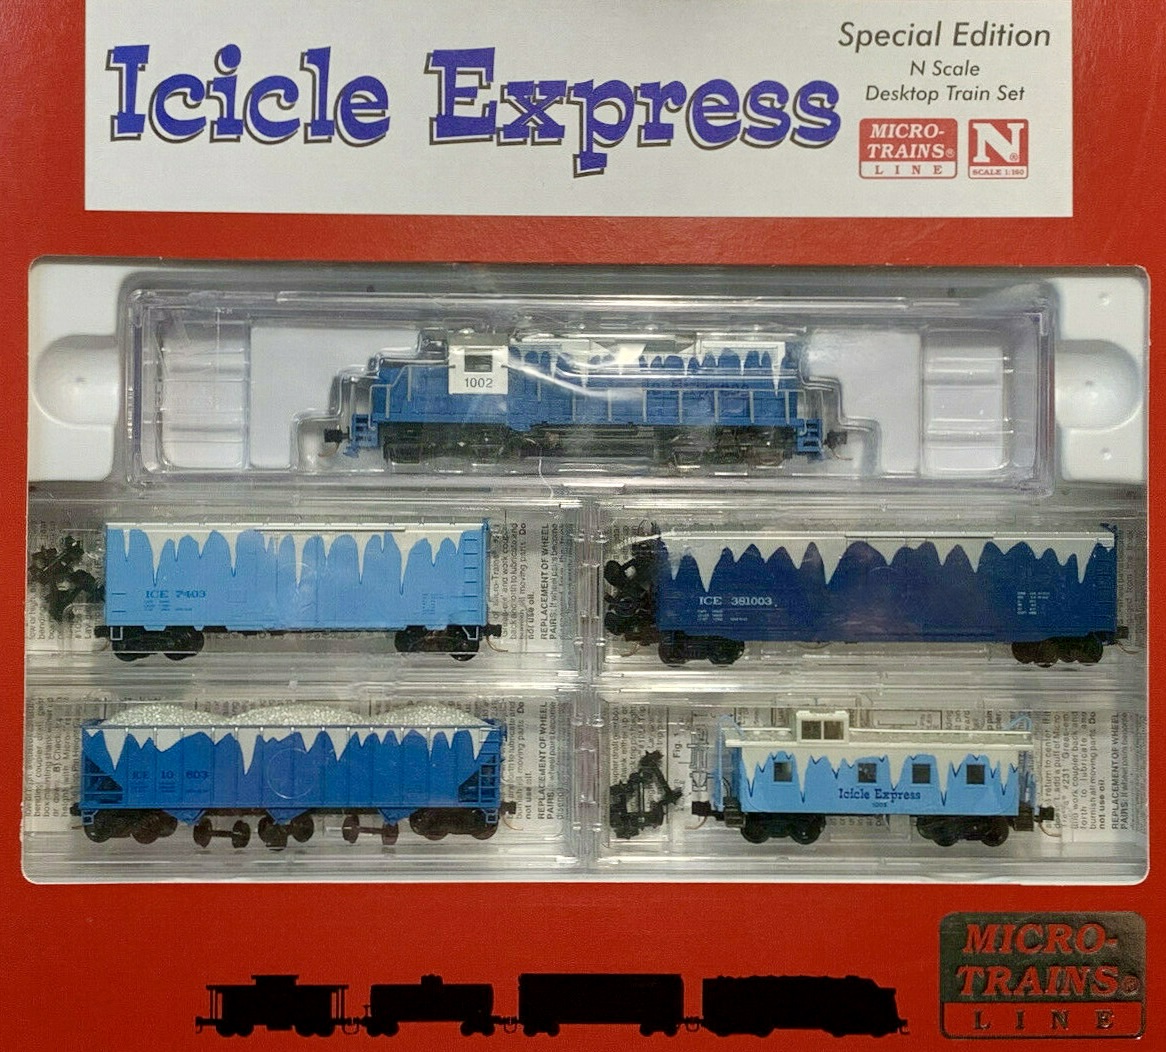 N Scale - Micro-Trains - 993 21 711 - Passenger Train, Diesel, North American, Transition Era - Holiday Car - Icicle Express